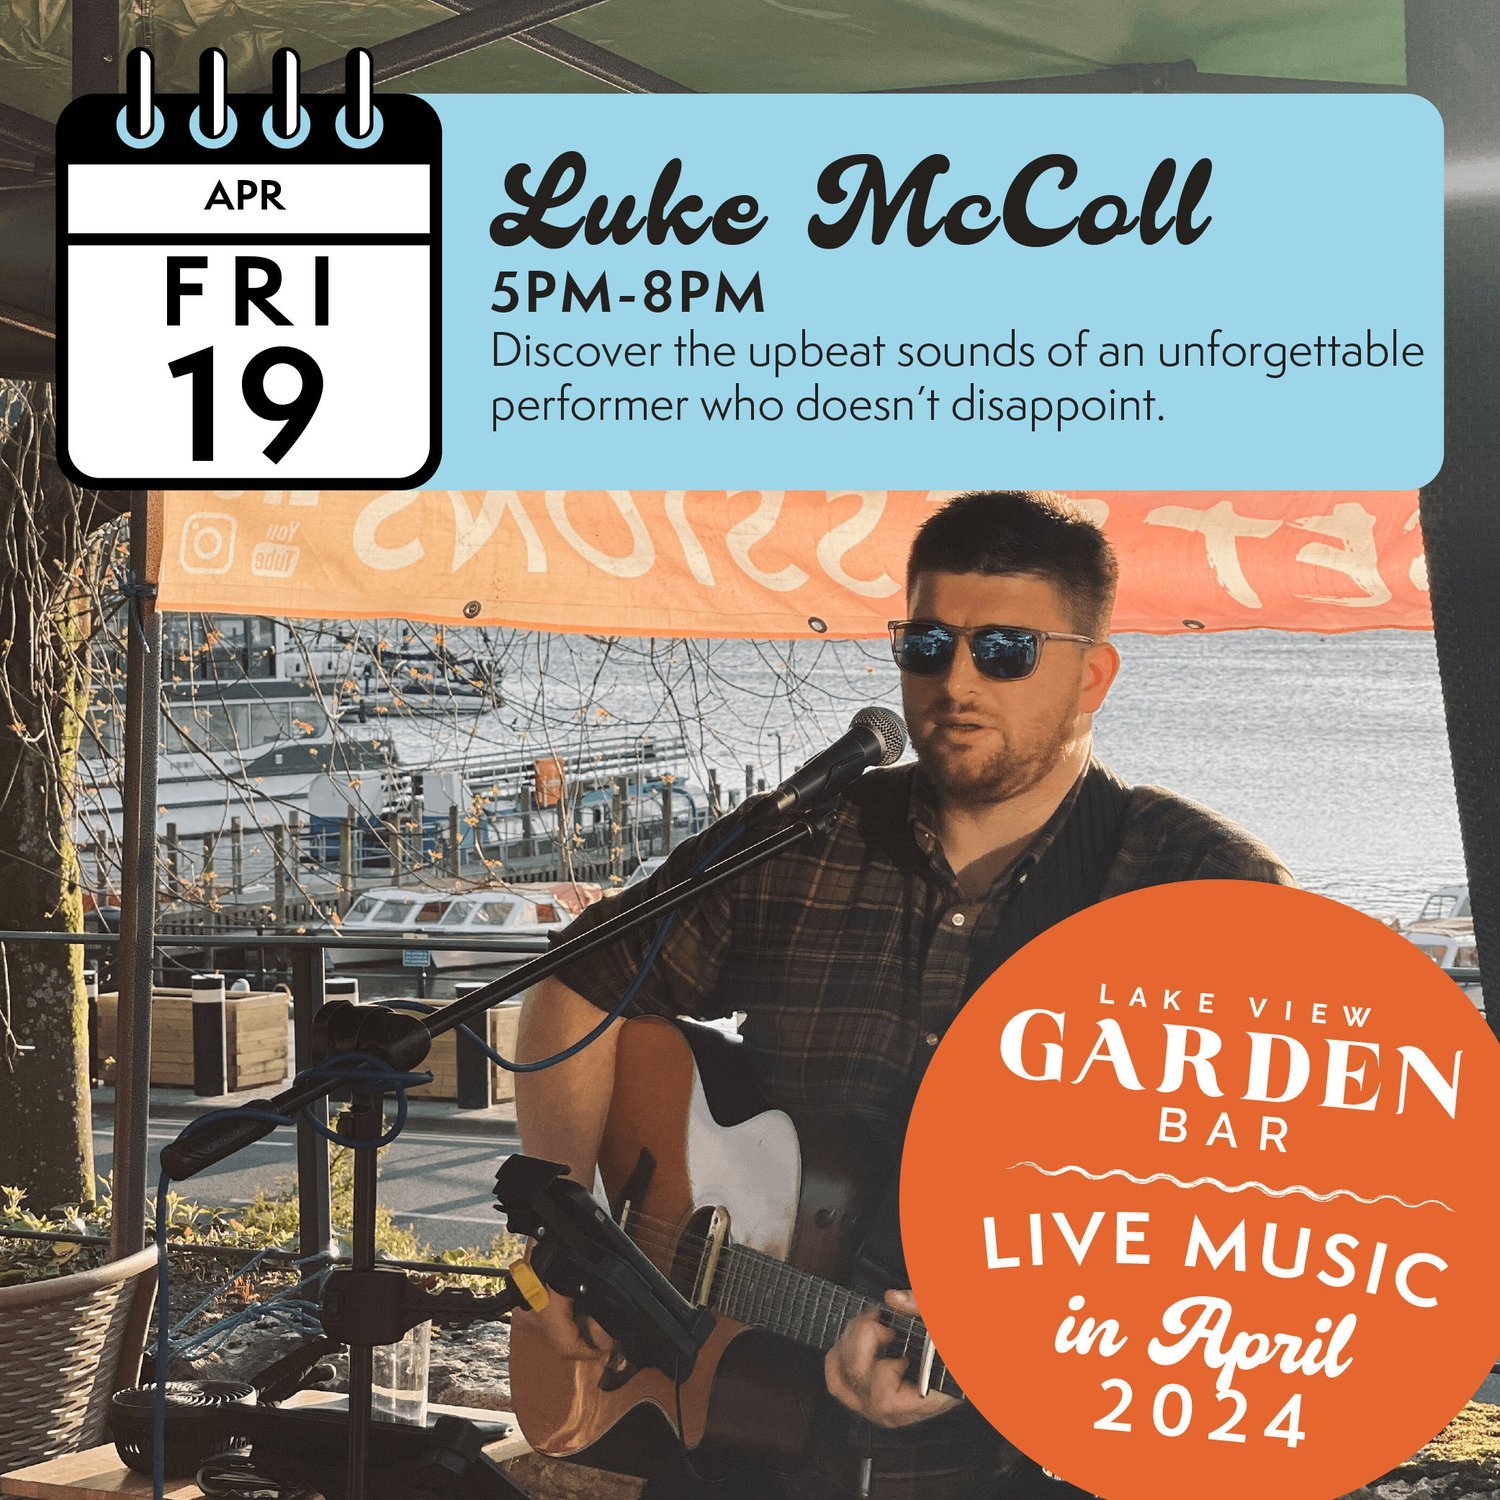 🎶🌟 Get ready for a weekend filled with incredible live music at Lake View Garden Bar! 🍻🎸

🗓️ On April 19th, don't miss the upbeat sounds of Luke McColl as he takes the stage at 5pm. It's a free event, so grab your friends and immerse yourself in